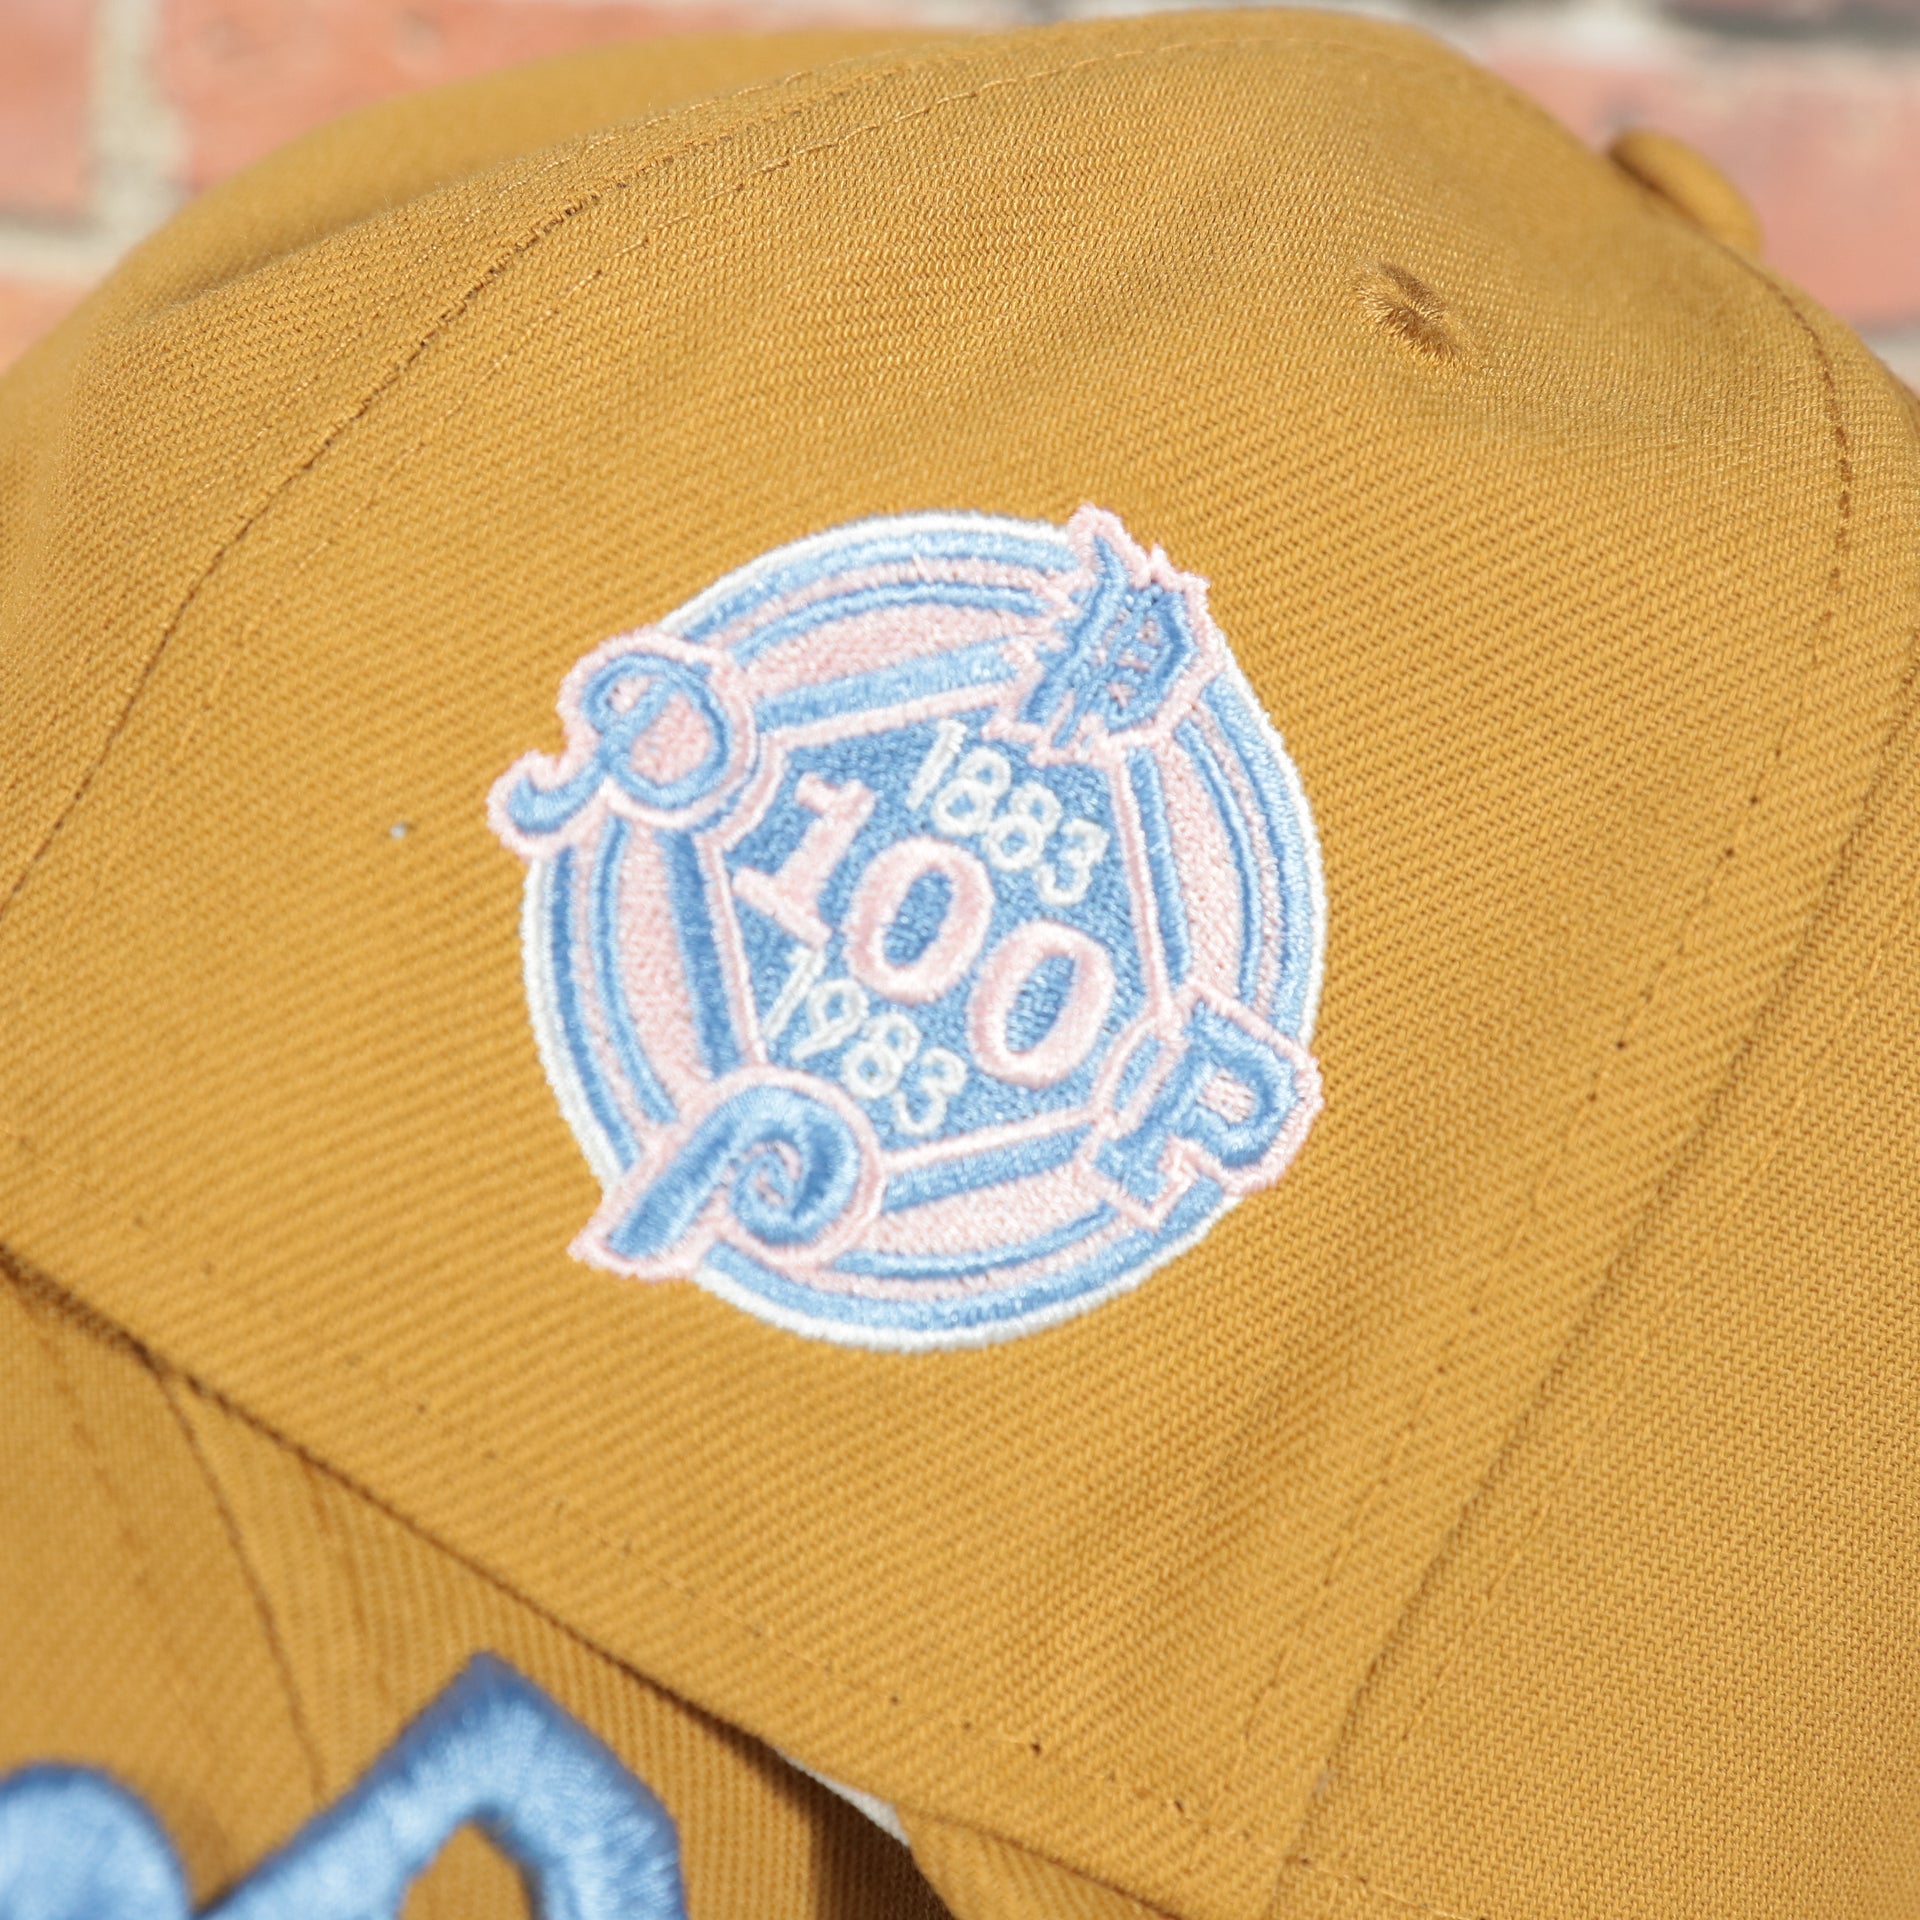 100th anniversary side patch on the Philadelphia Phillies Cooperstown 1910 Logo 100th Anniversary Side Patch Icy Blue UV 59Fifty Fitted Cap | "English Toffee" Hoagie Pack